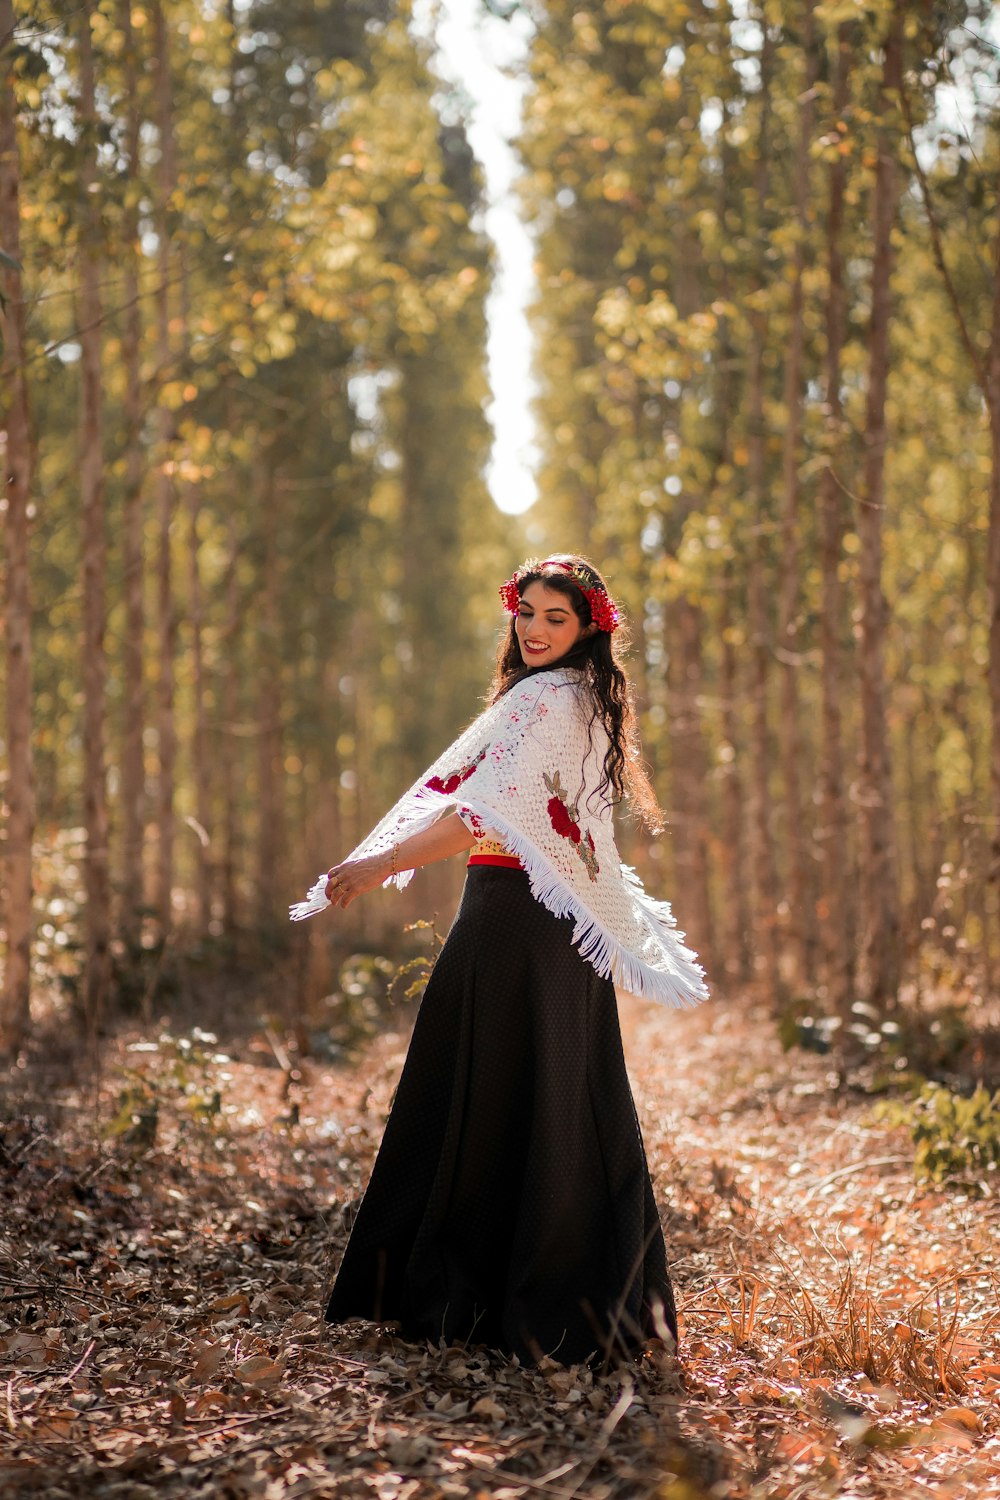 a person in a dress in a forest